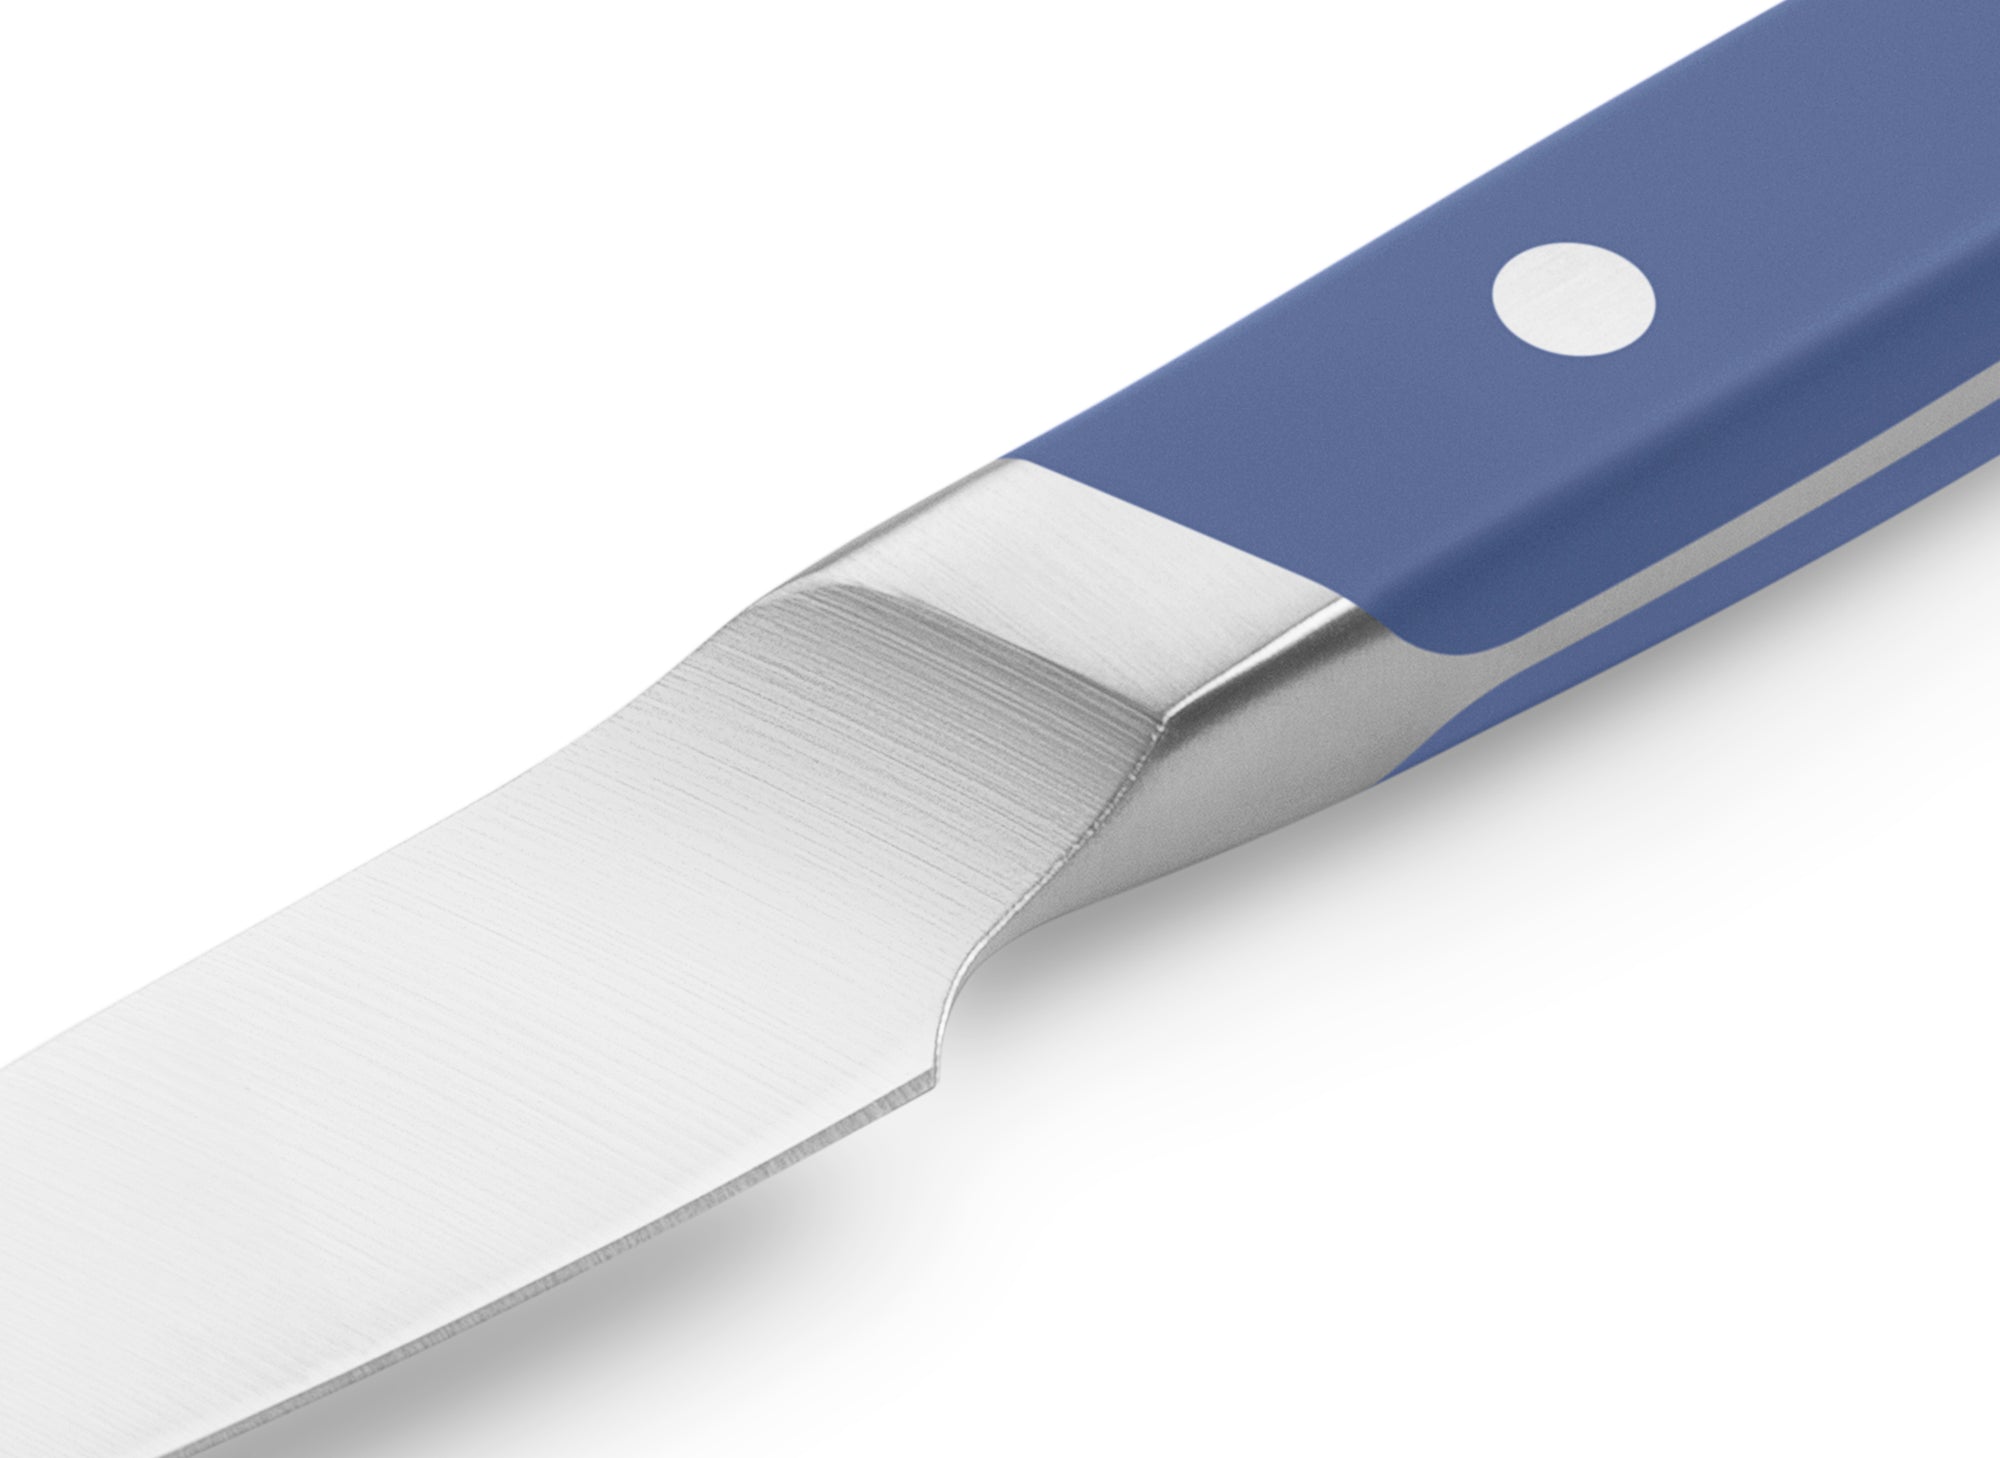 The Misen Paring Knife in blue features a unique sloped bolster.